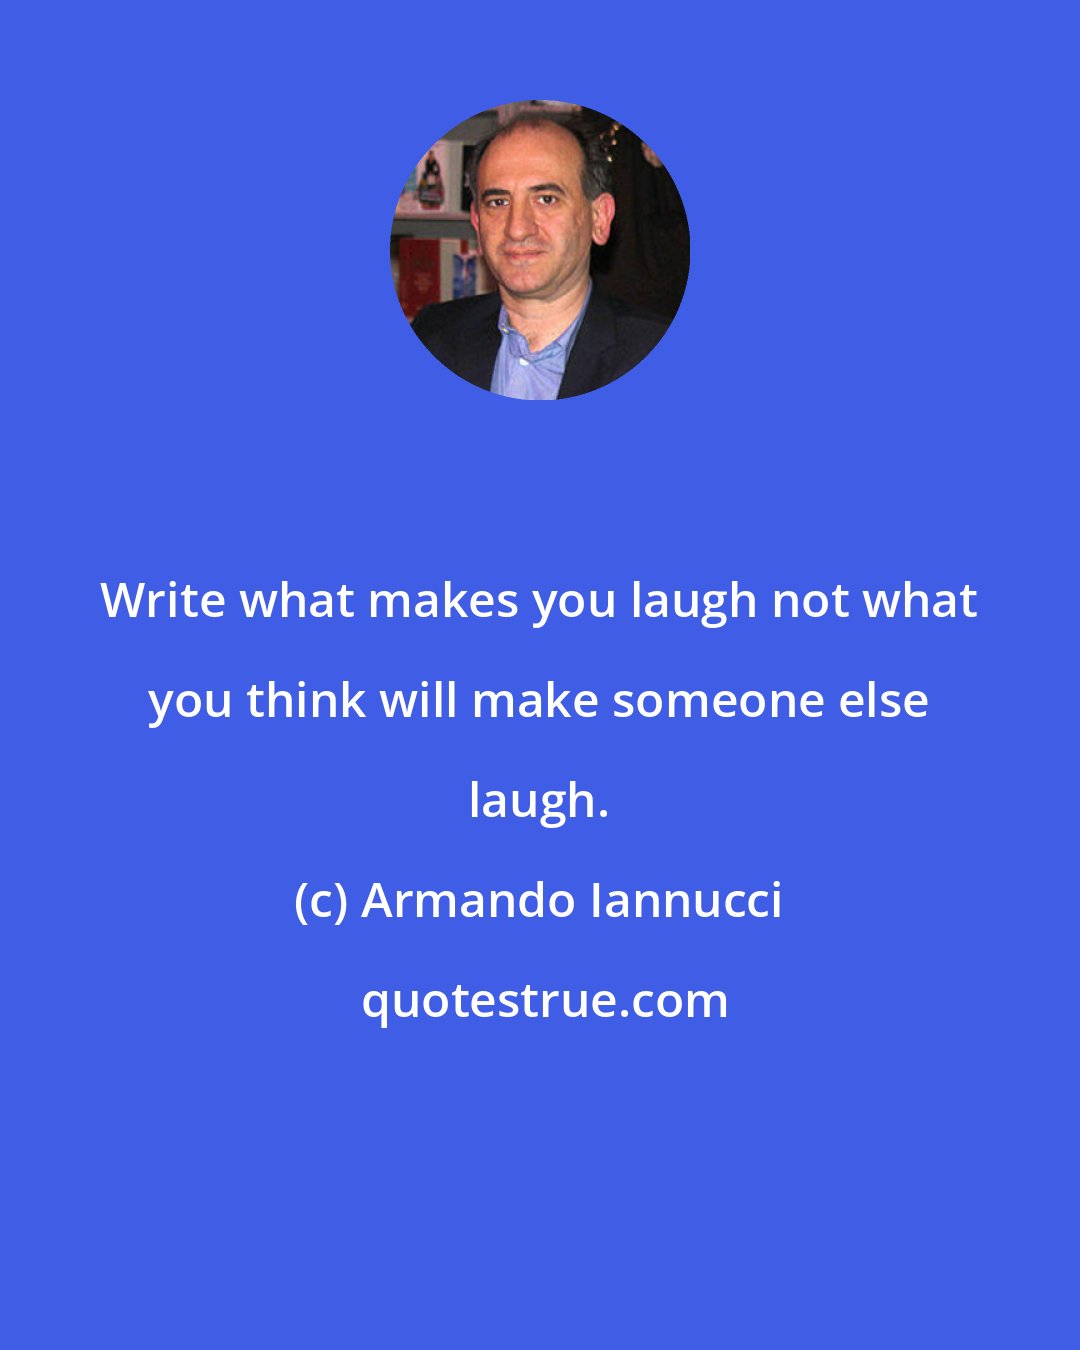 Armando Iannucci: Write what makes you laugh not what you think will make someone else laugh.